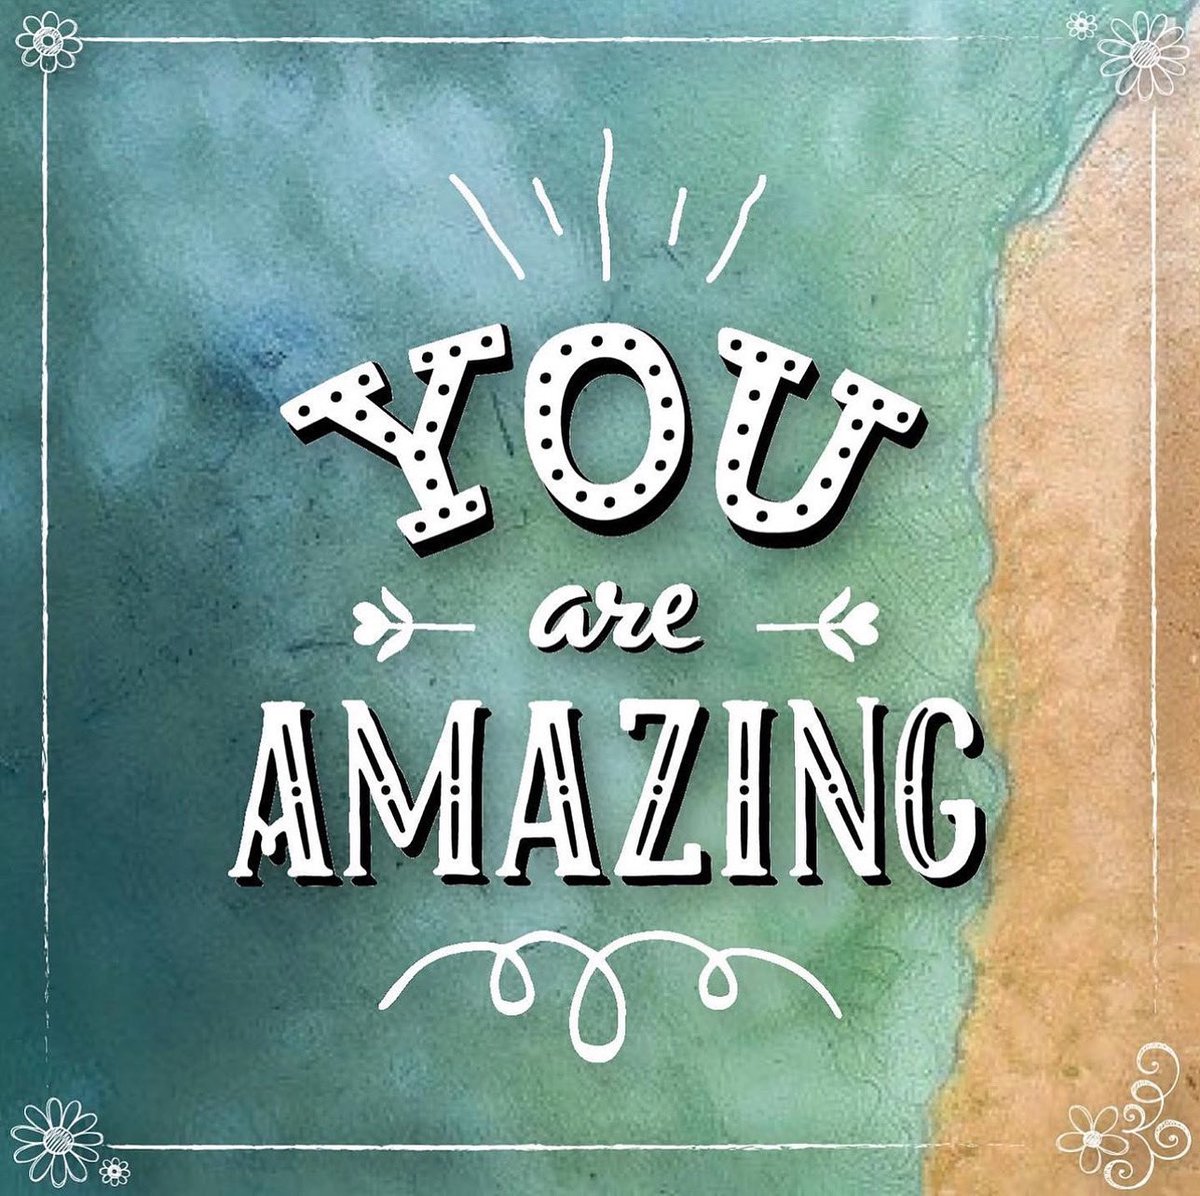 In case you needed a reminder today… 

Have an amazing week!

#monday #mondaymotivation #motivationmonday #haveablessedweek #youareamazing #mondayreminder